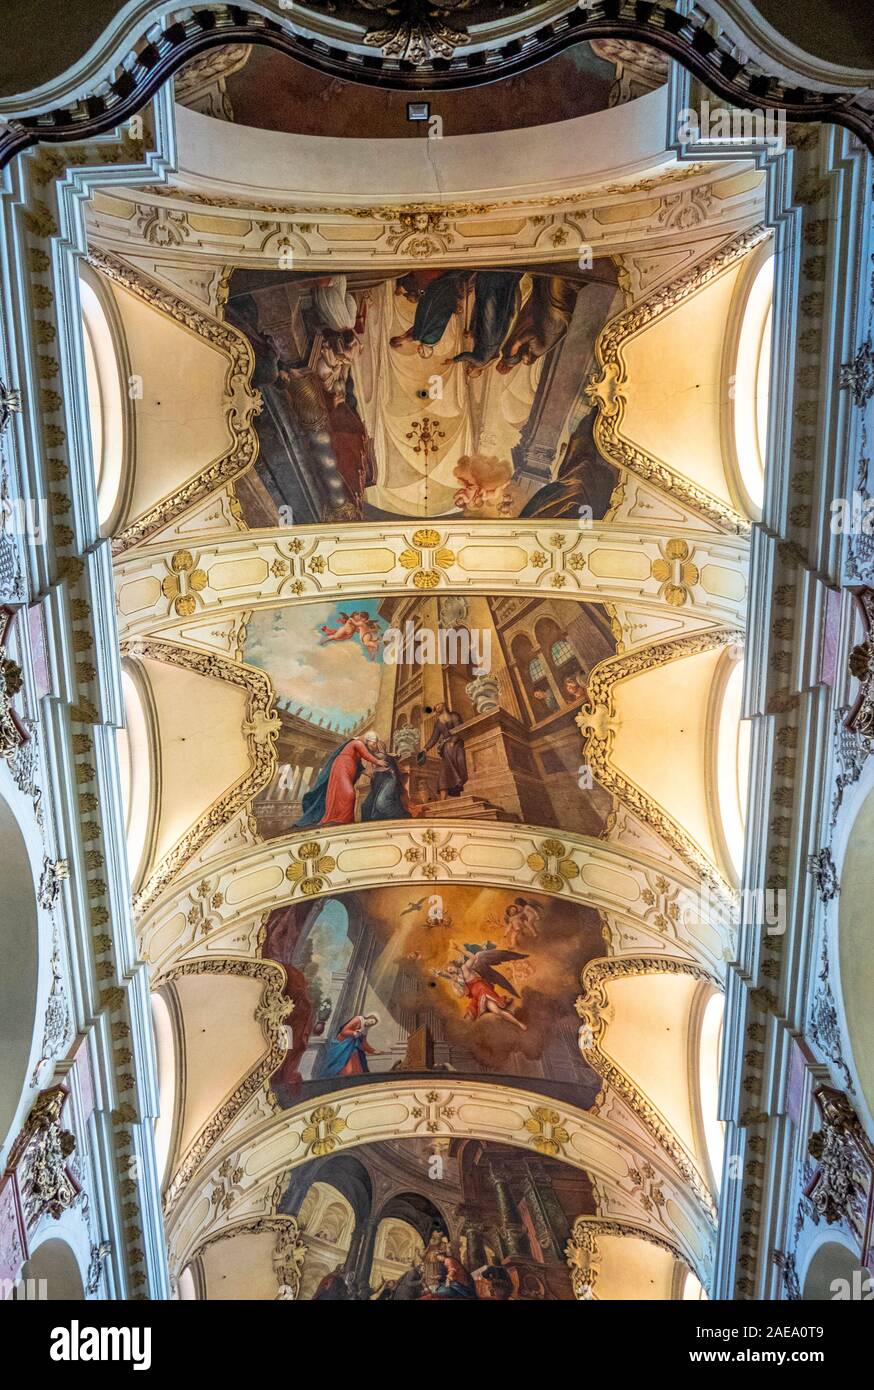 Painted ceiling depicting religious scenes in Basilica of St. James Old Town Prague Czech Republic. Stock Photo